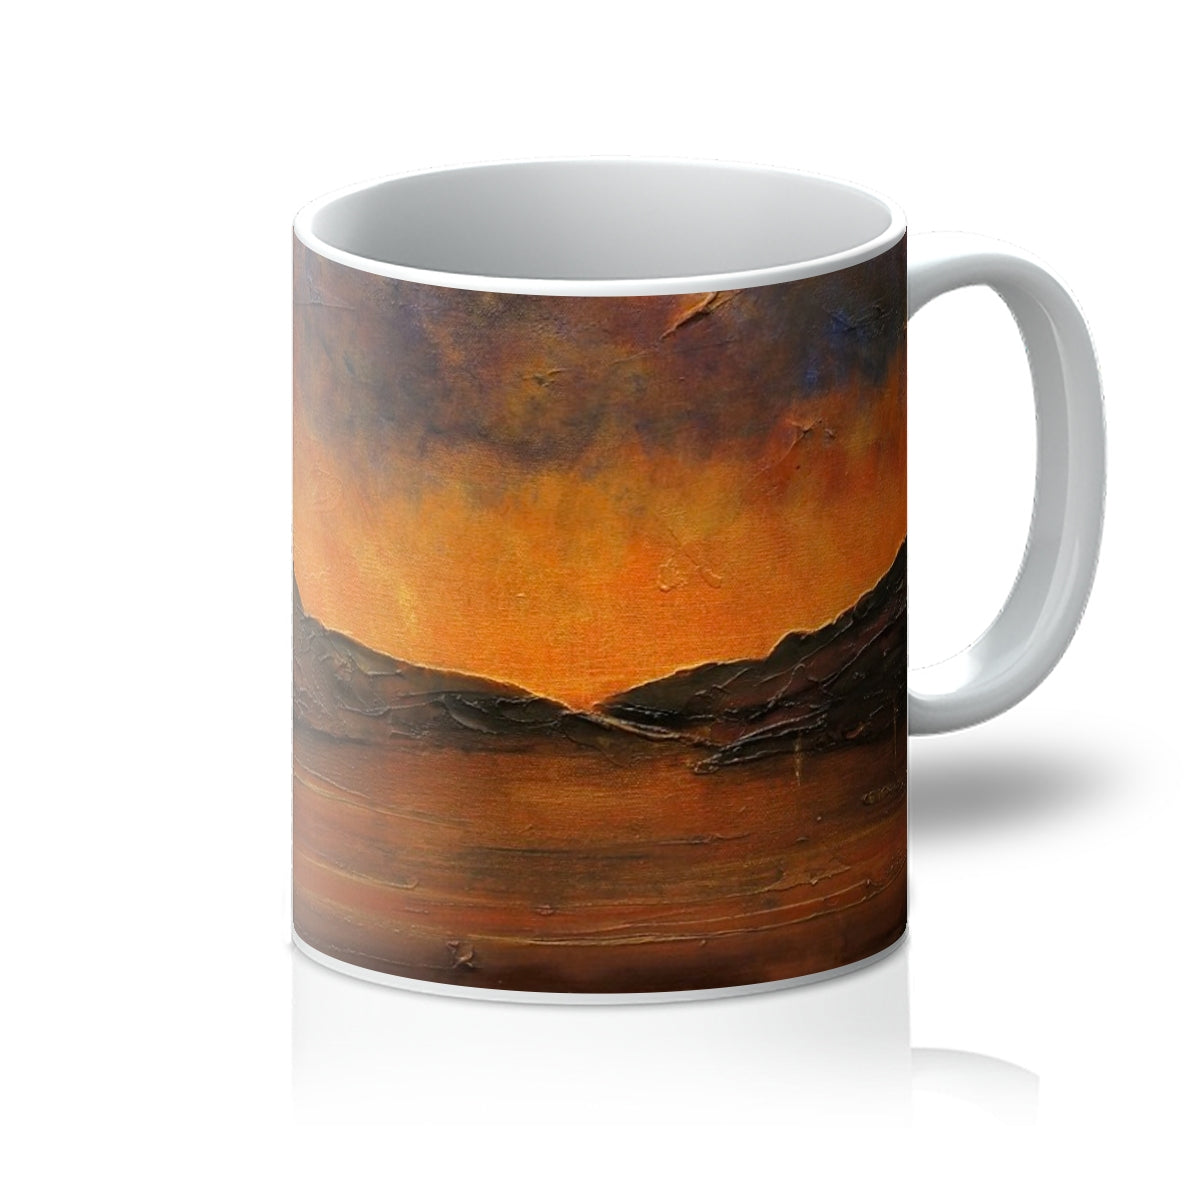 A Brooding Clyde Dusk Art Gifts Mug-Homeware-River Clyde Art Gallery-11oz-White-Paintings, Prints, Homeware, Art Gifts From Scotland By Scottish Artist Kevin Hunter